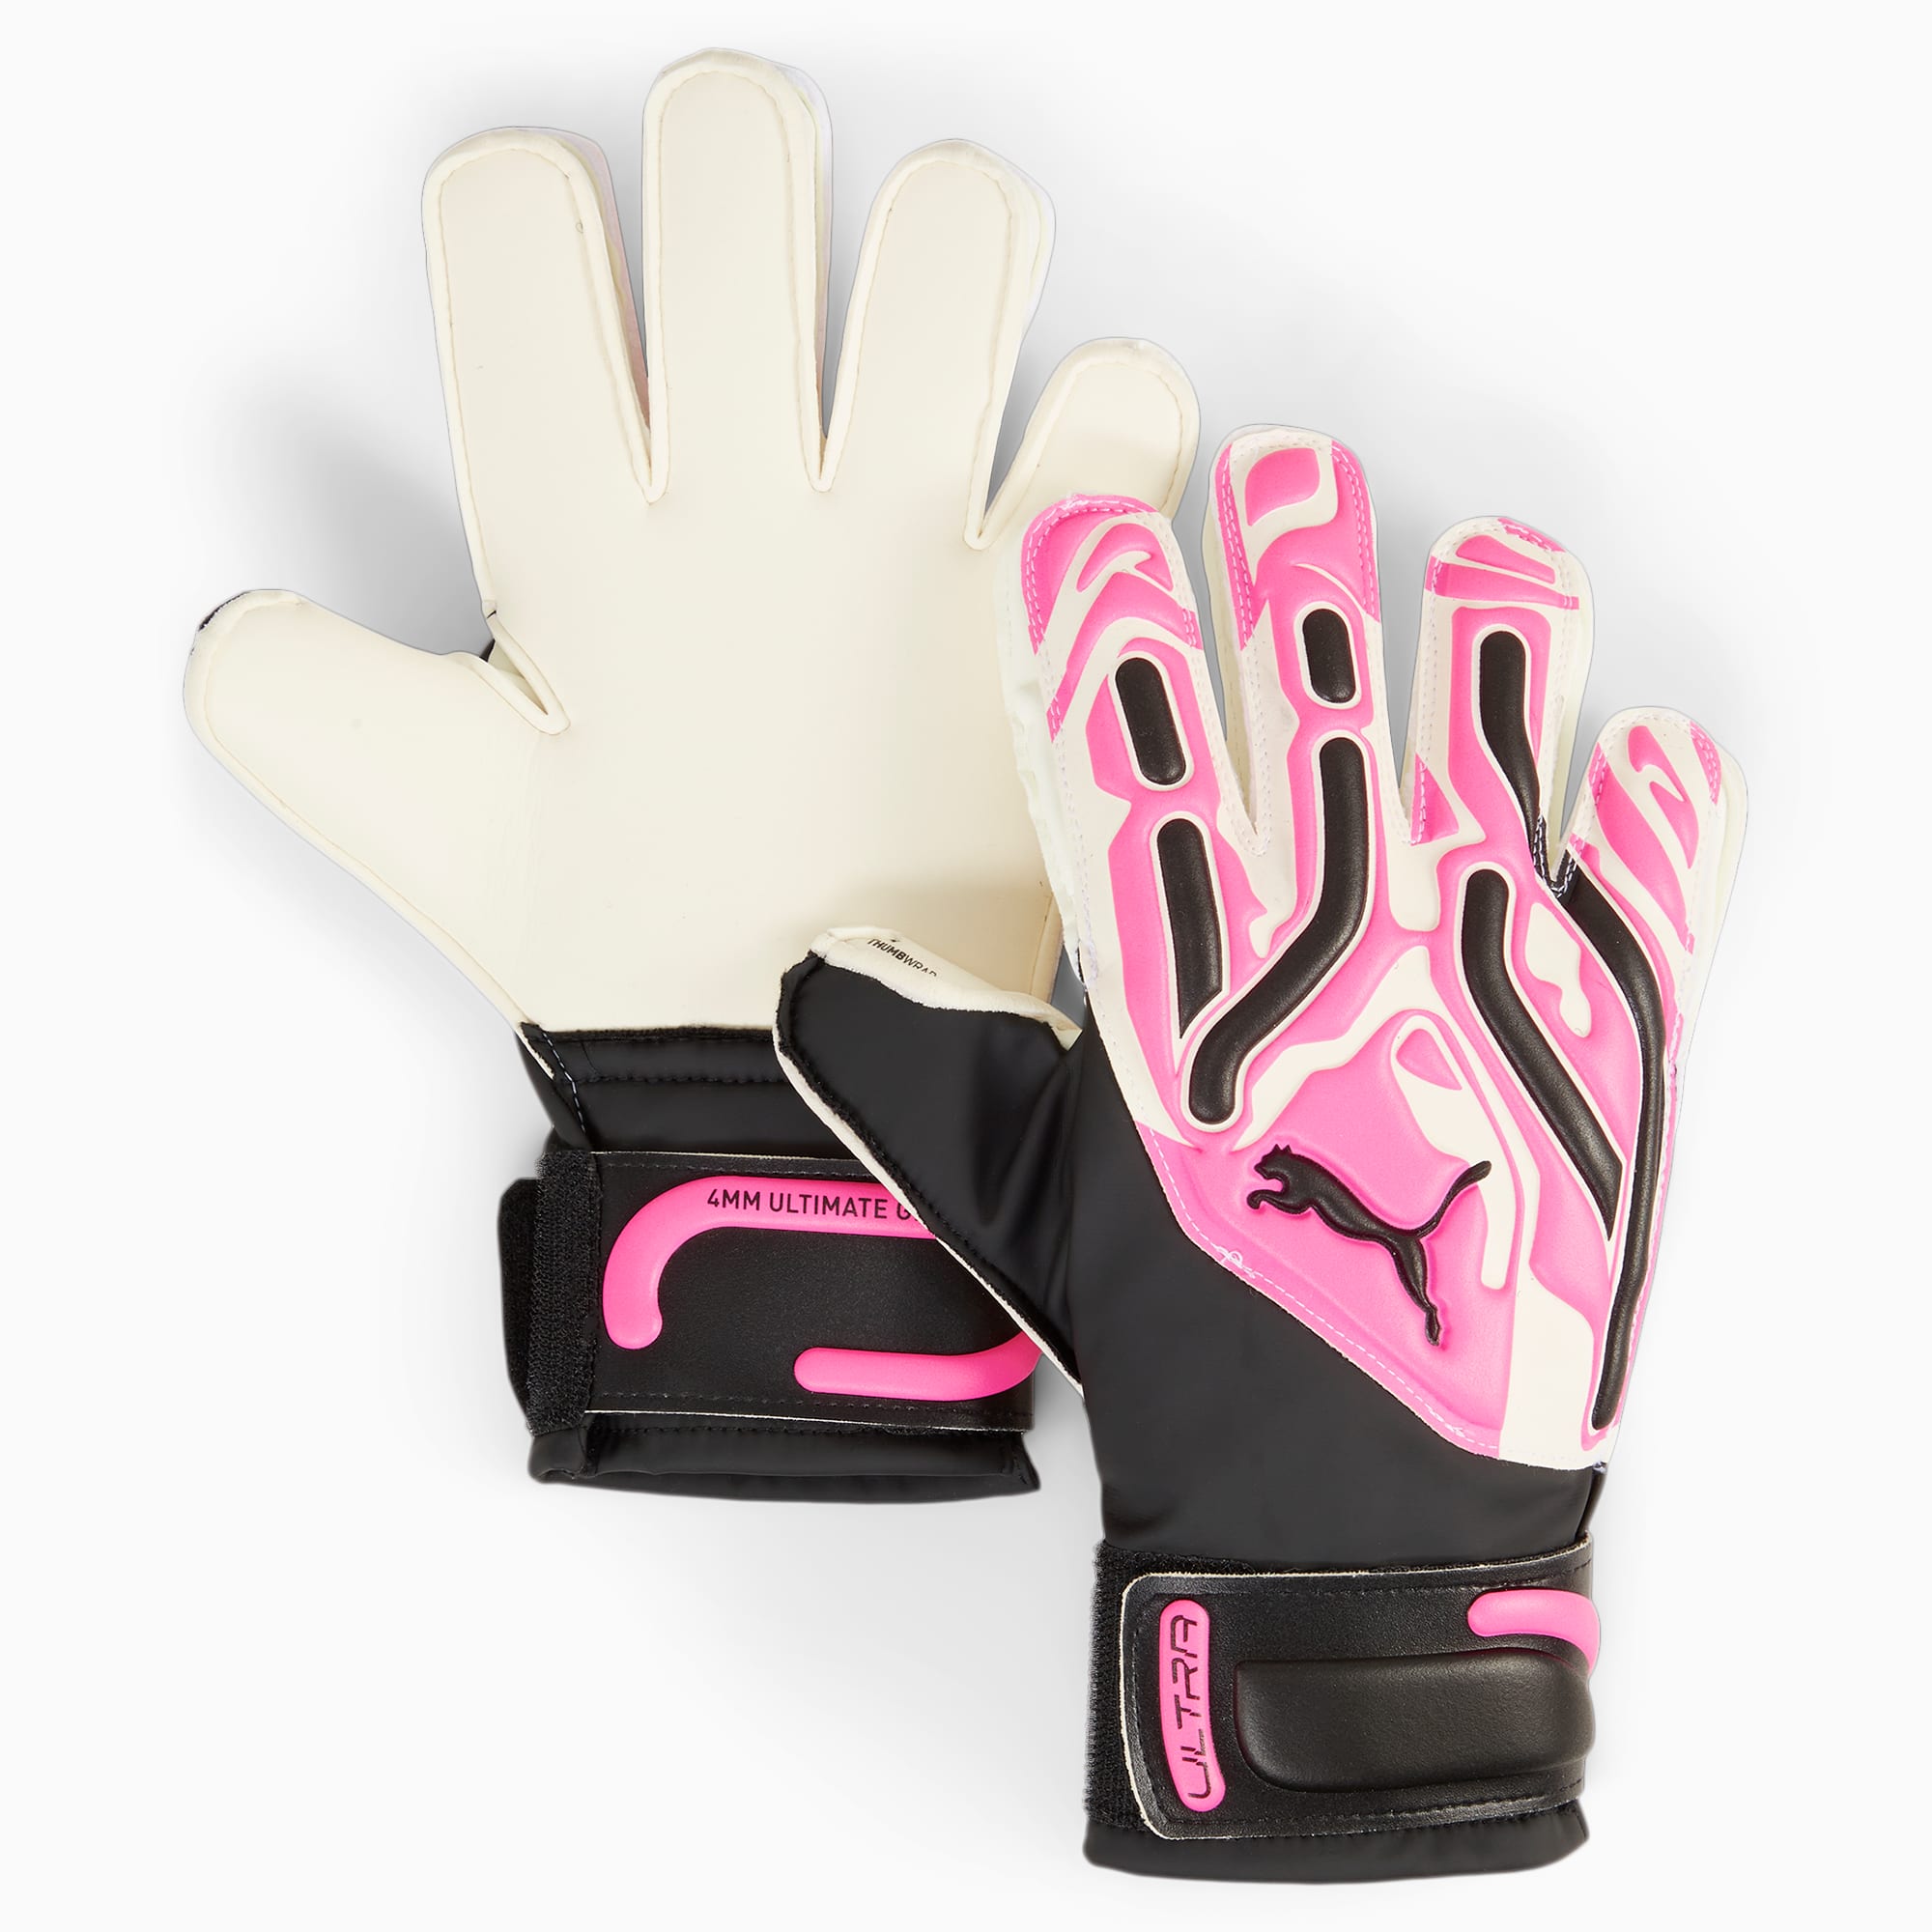 PUMA Ultra Match Protect Youth Goalkeeper Gloves, Poison Pink/White/Black, Size 4, Accessories